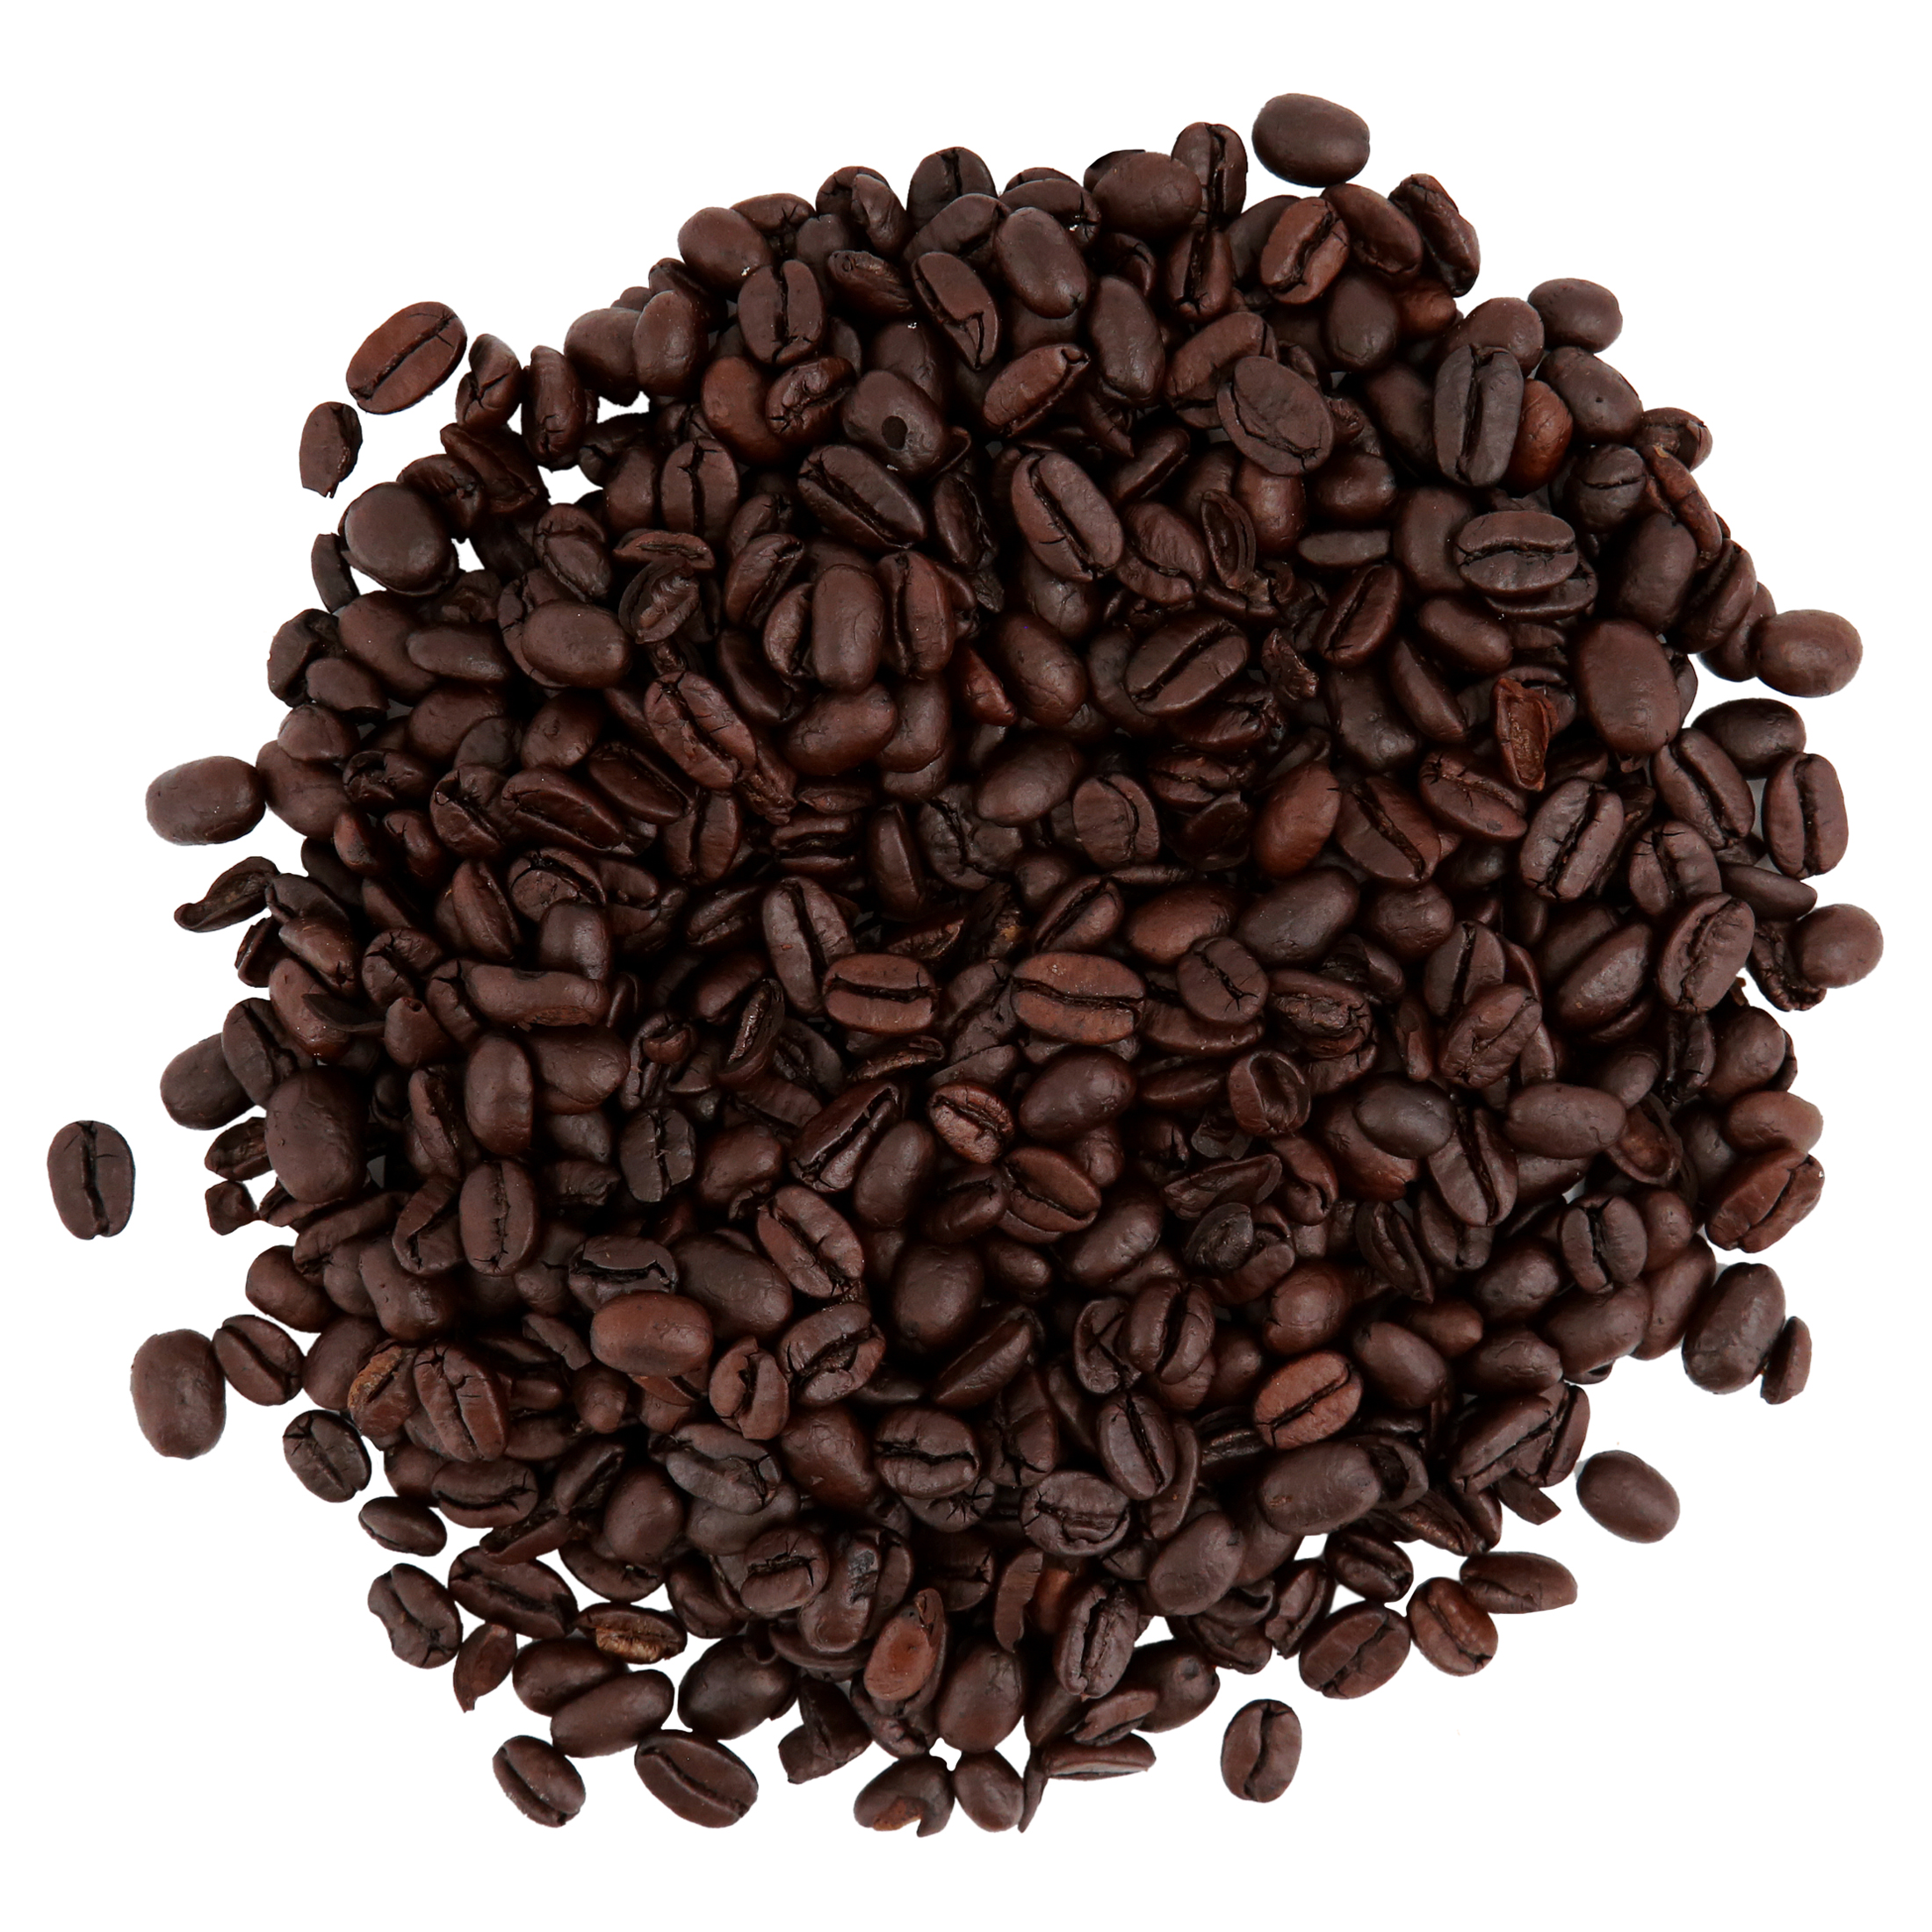 Land Mark Coffee Beans Decaf French Roast, 32.0 OZ - image 4 of 6